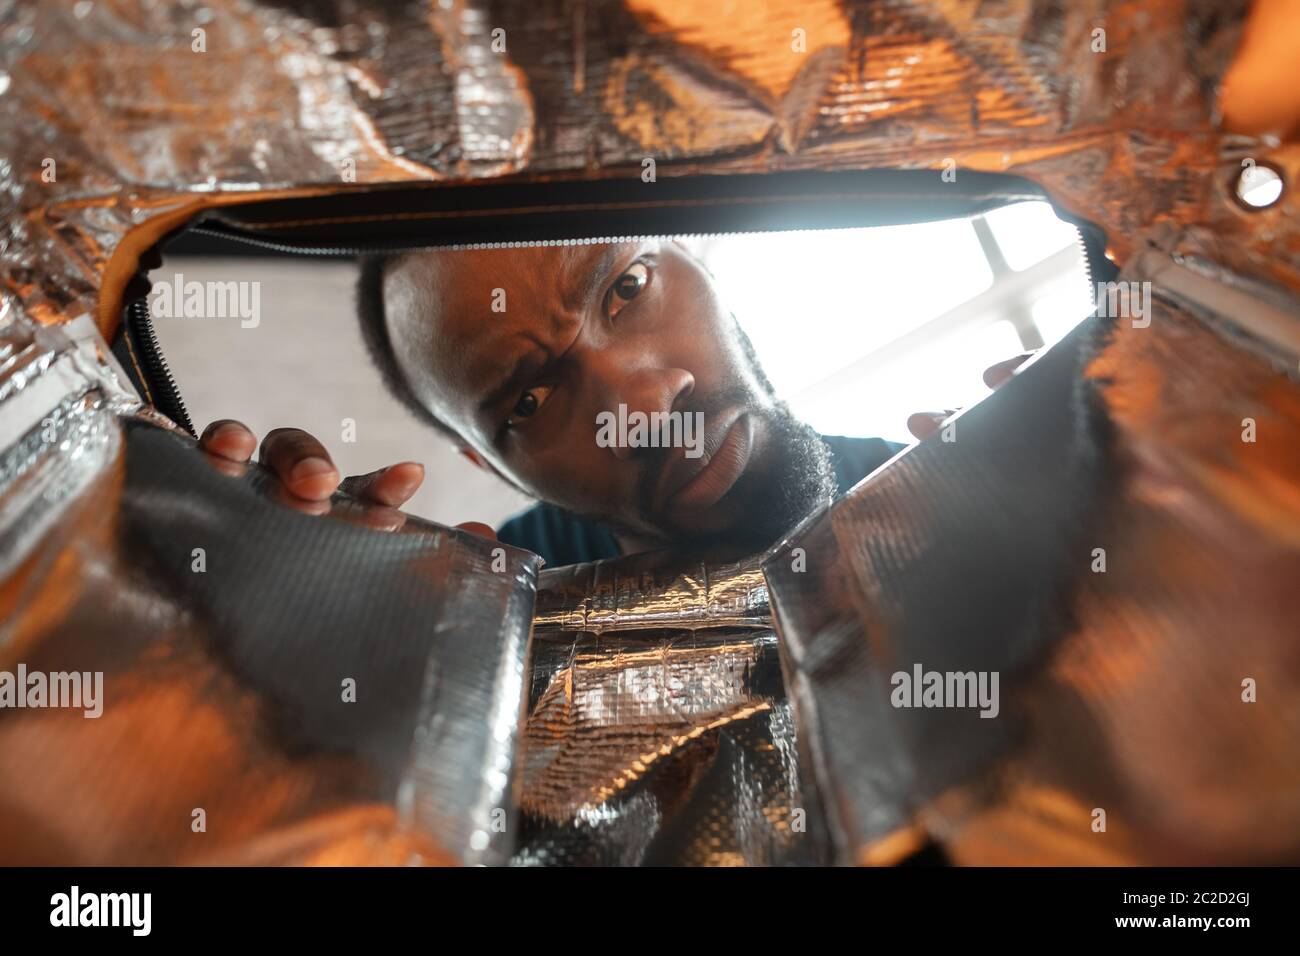 In old postal, delivery box. African-american man looking for job in unusual places at his home. Crazy, funny way to find career and going up. Concept of crisis, unemployment, finance, business. Stock Photo